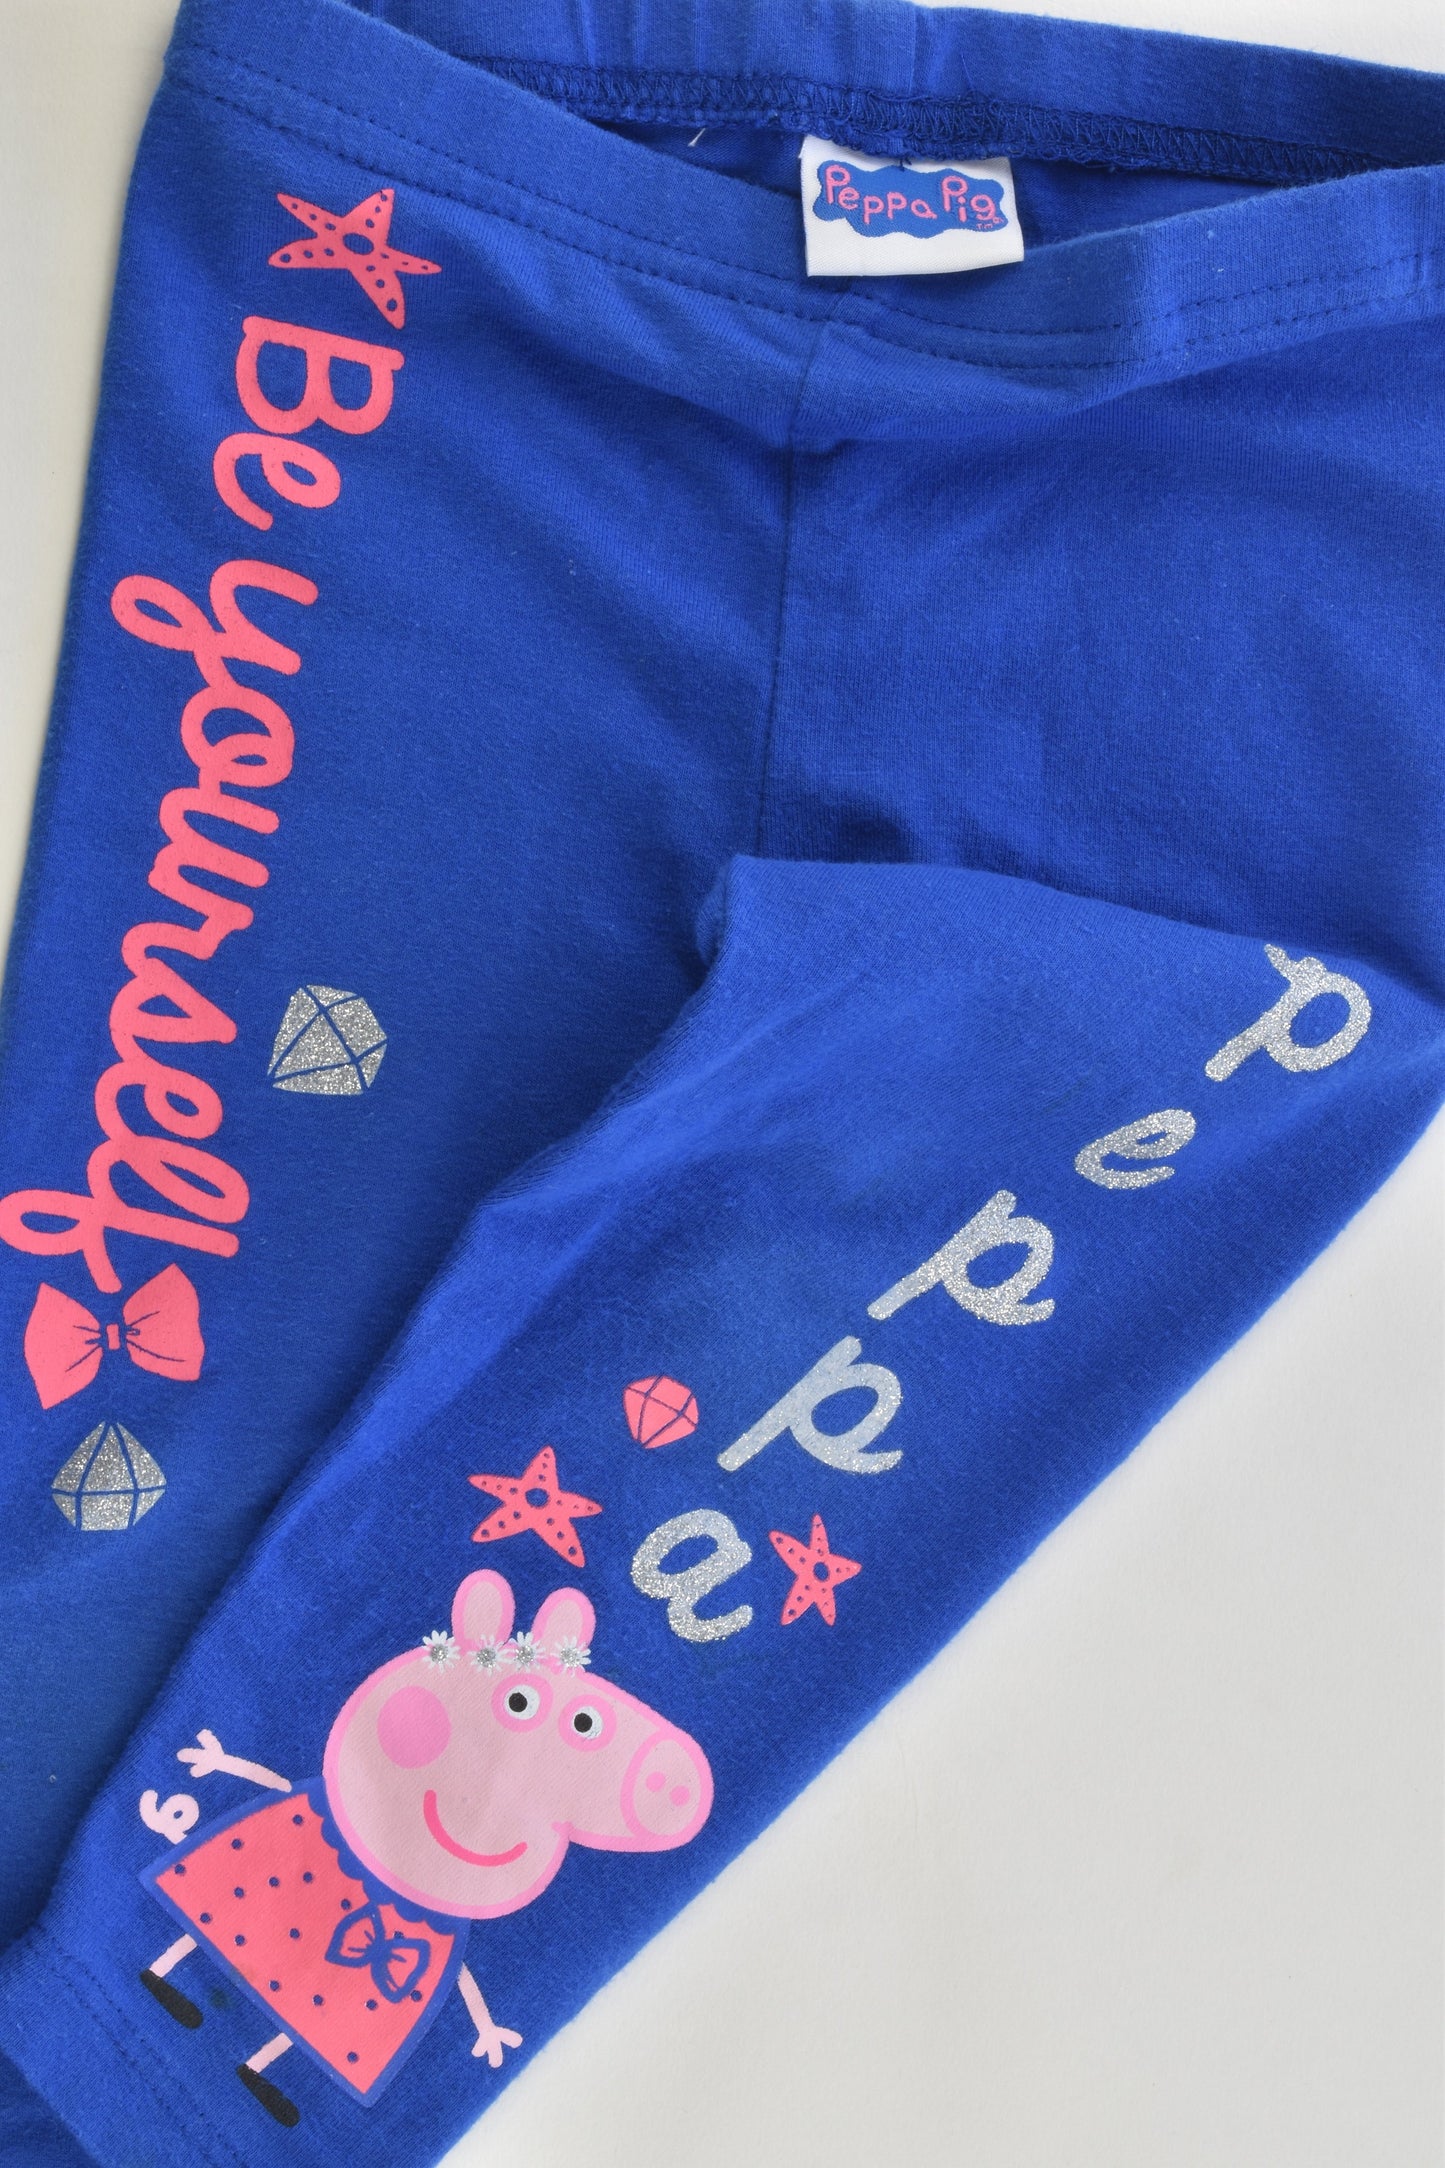 Peppa Pig Size 1 "Be Yourself" Leggings